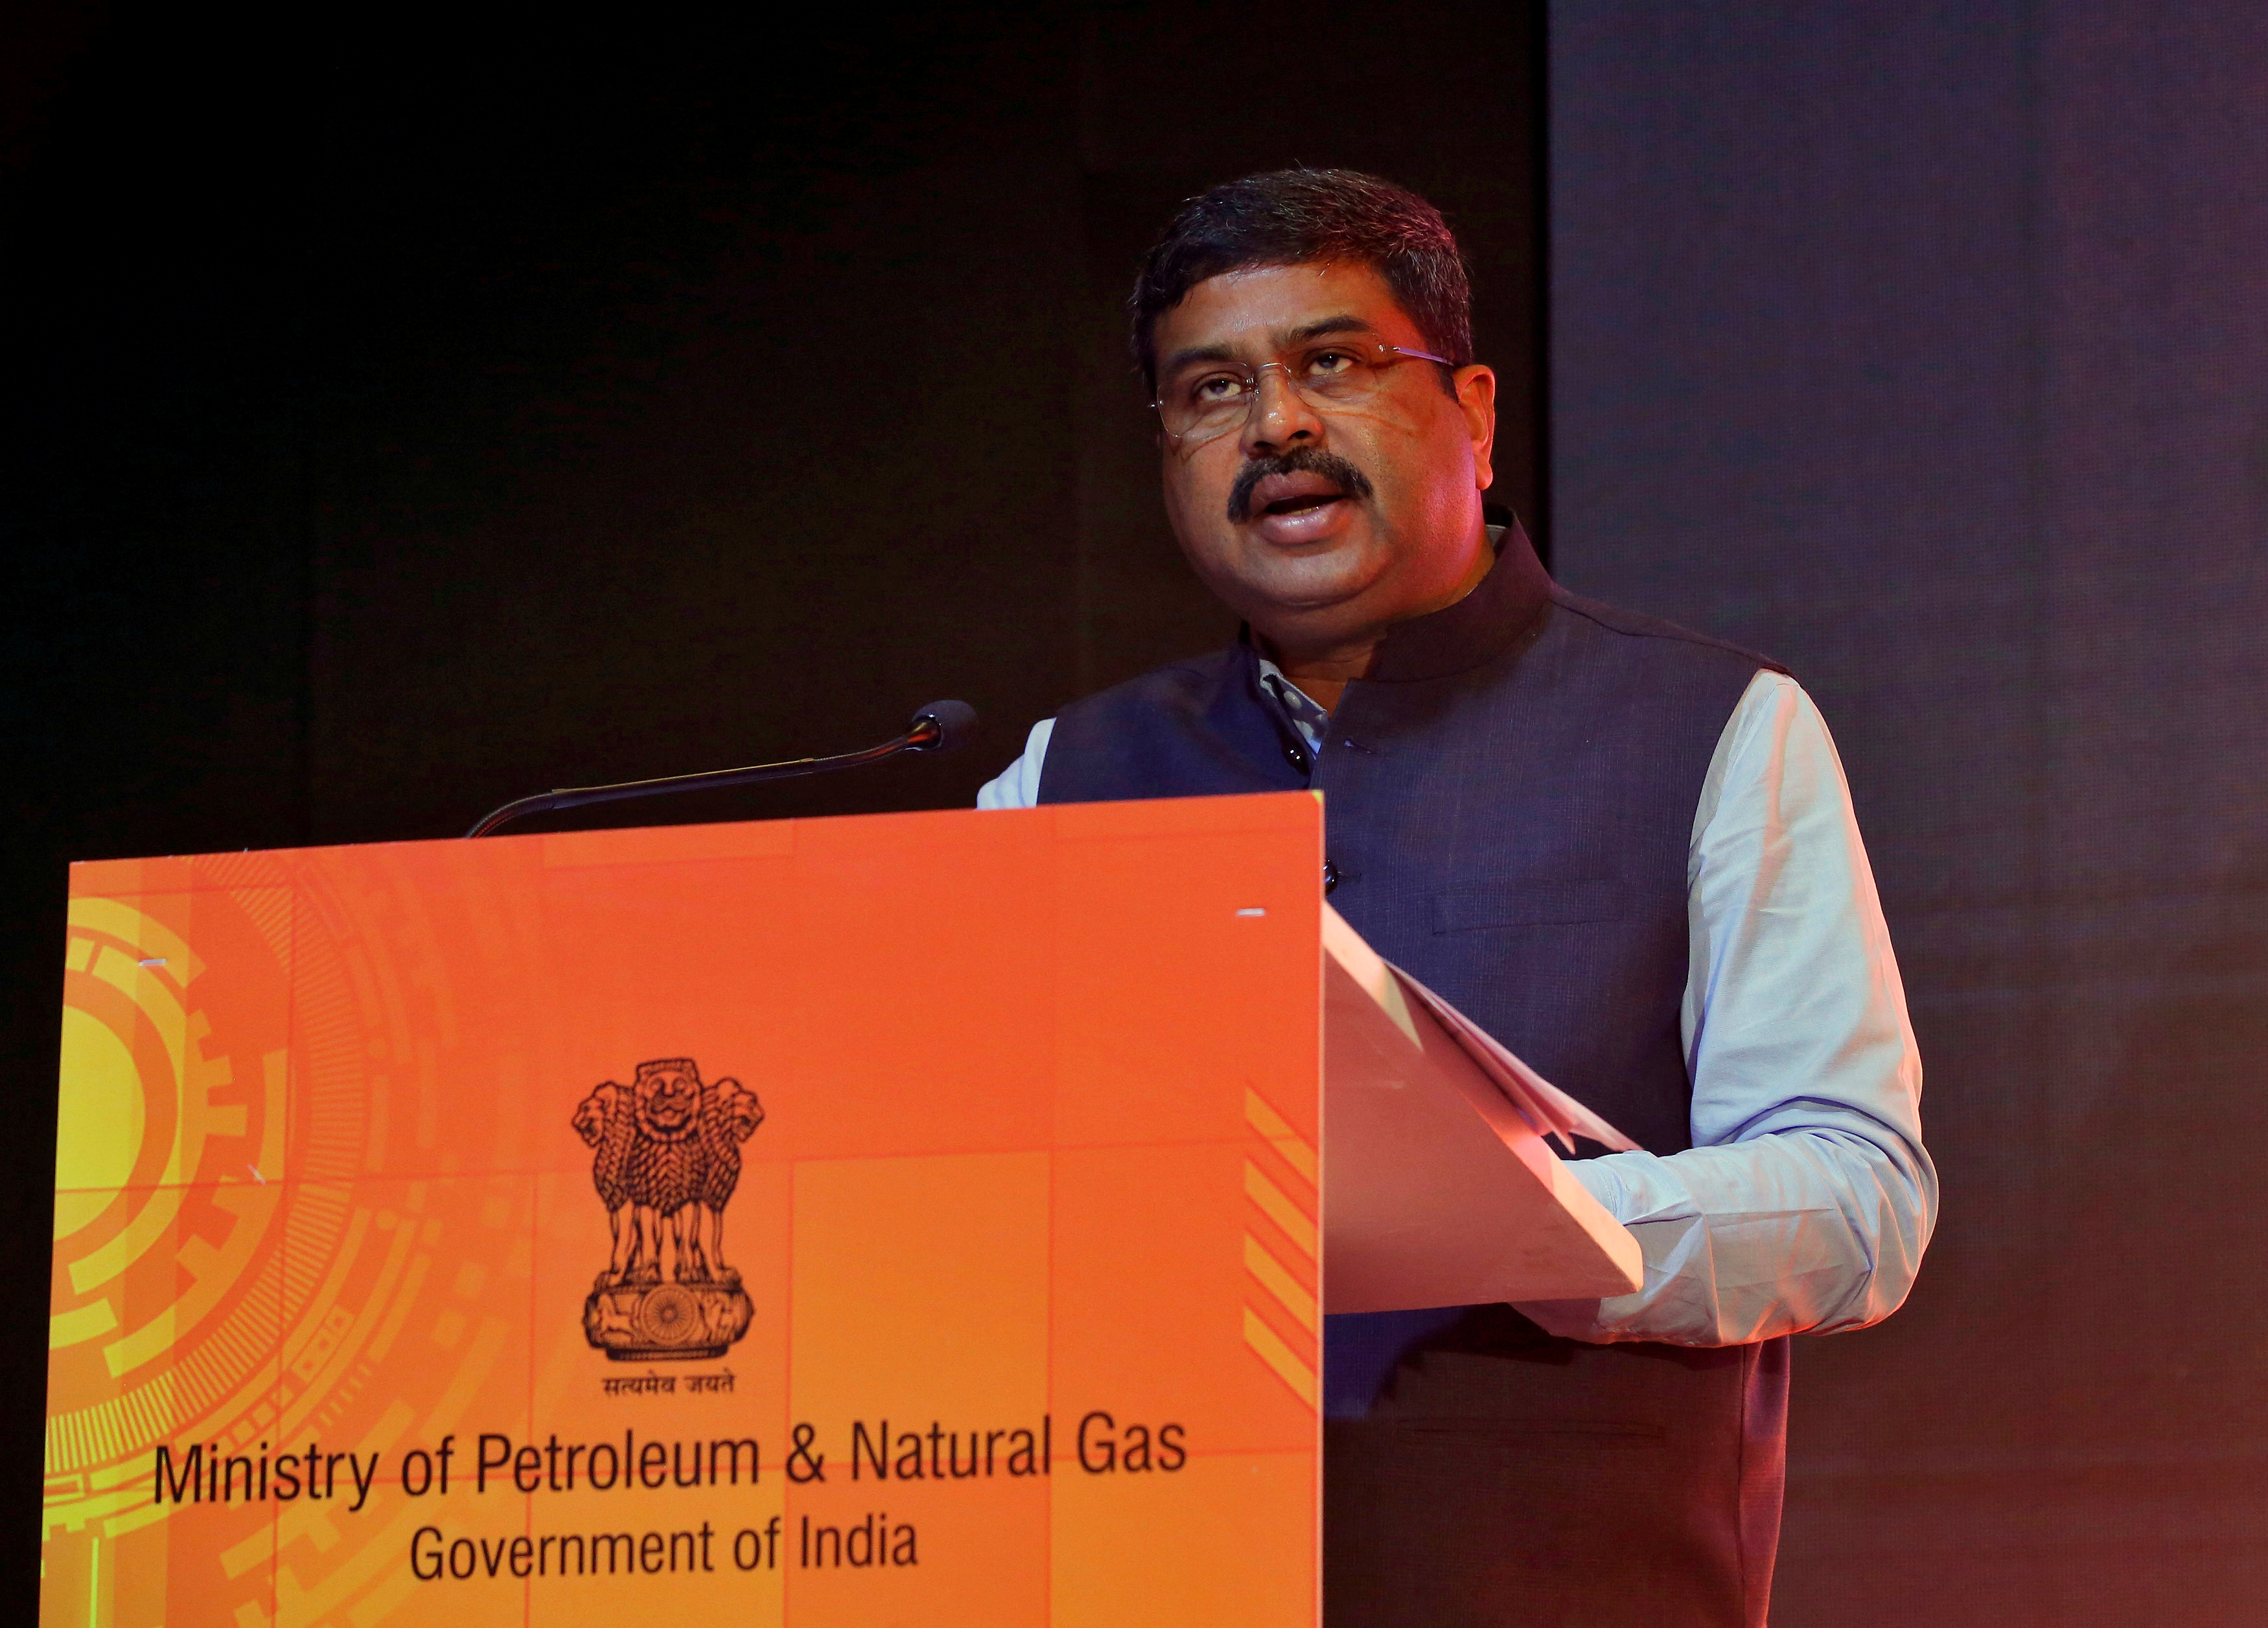 India's Oil Minister Dharmendra Pradhan speaks at a road show organised by the Directorate General of Hydrocarbon in Mumbai